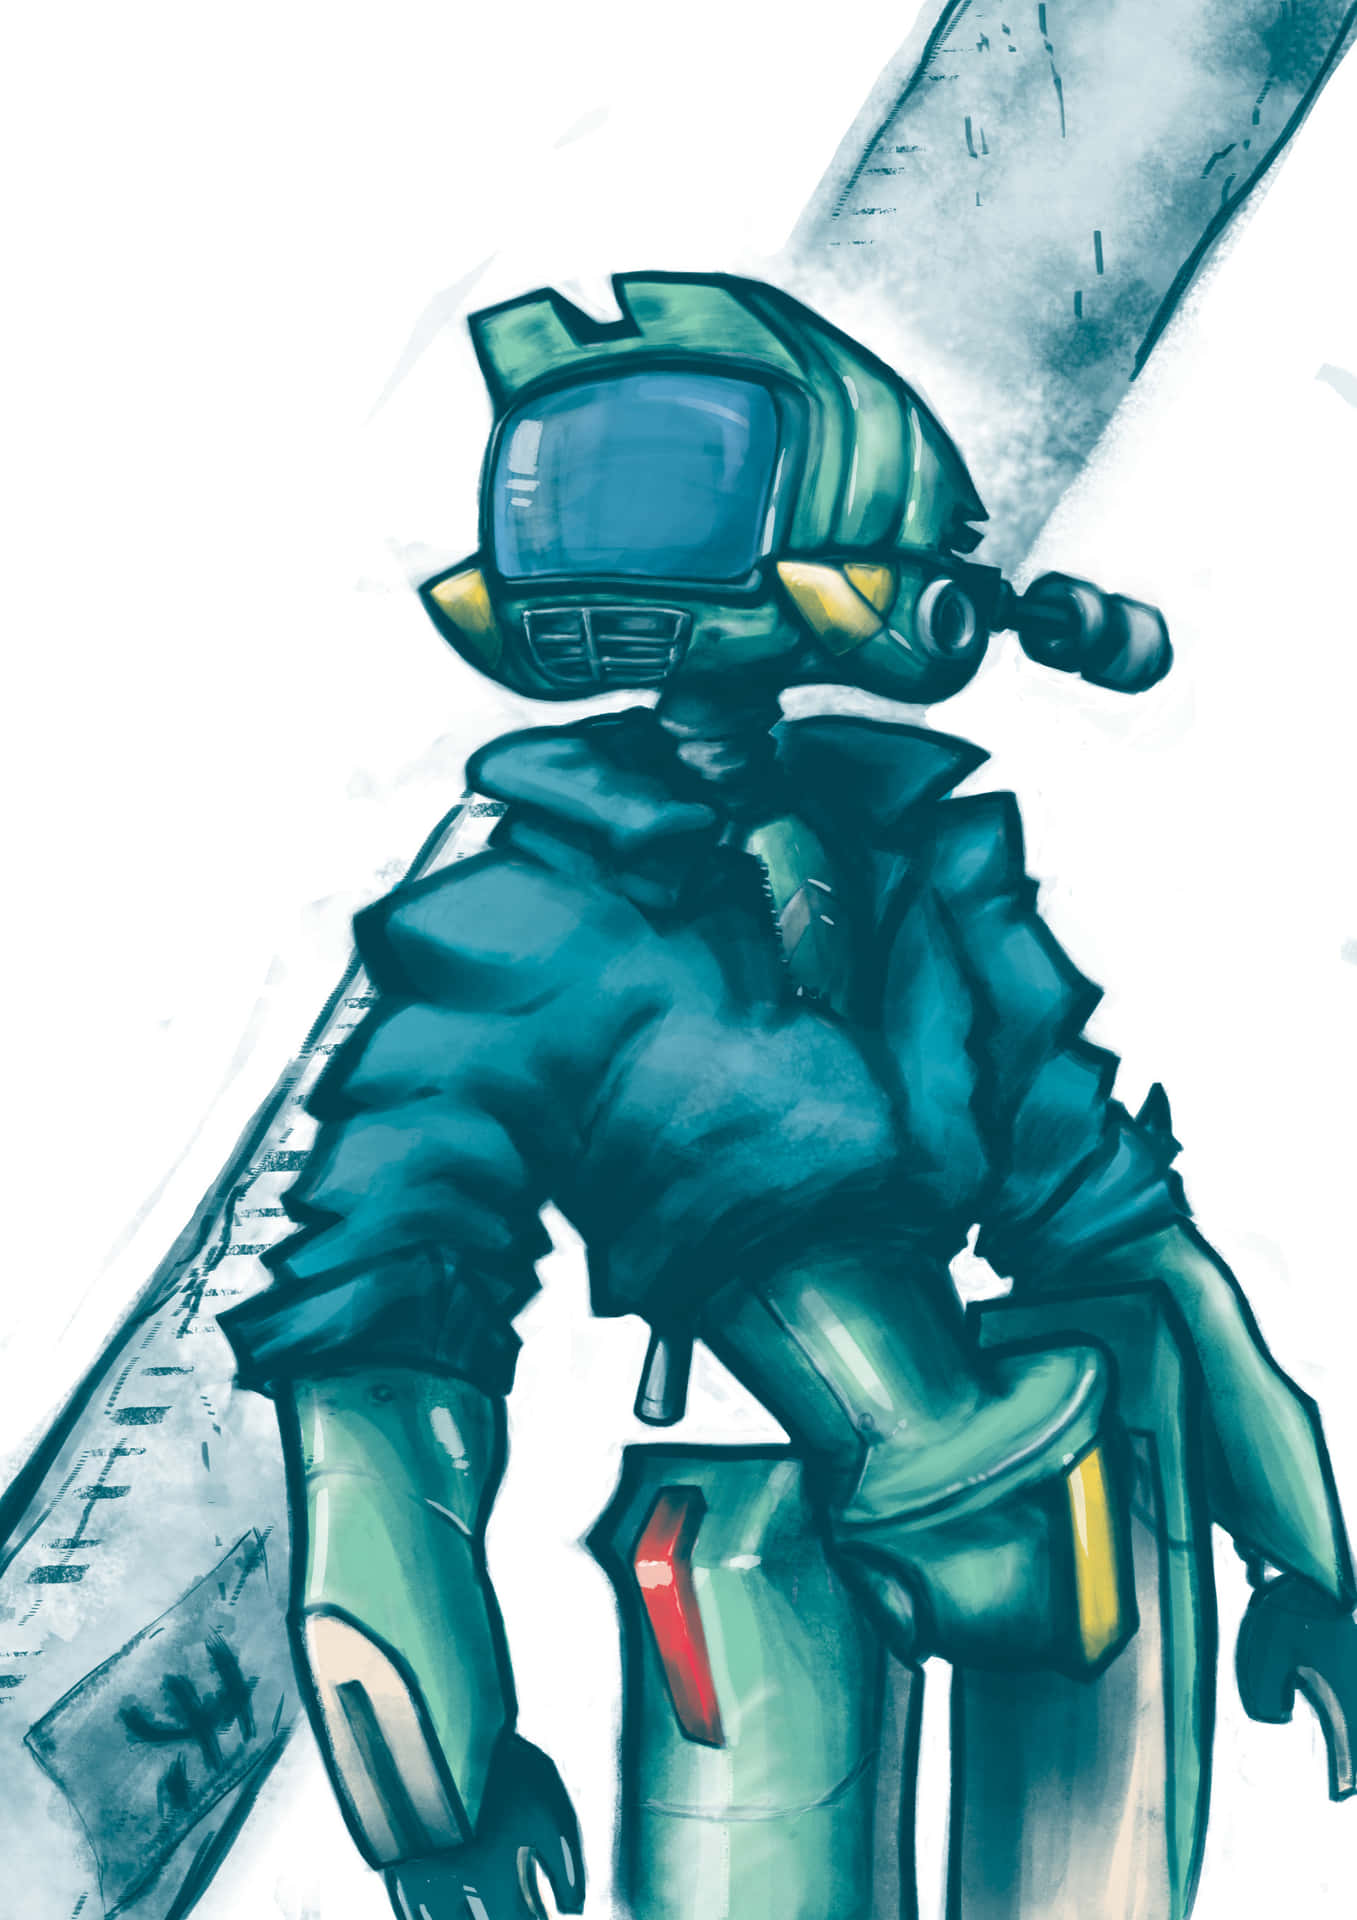 Canti - The Enigmatic Robot from FLCL Wallpaper